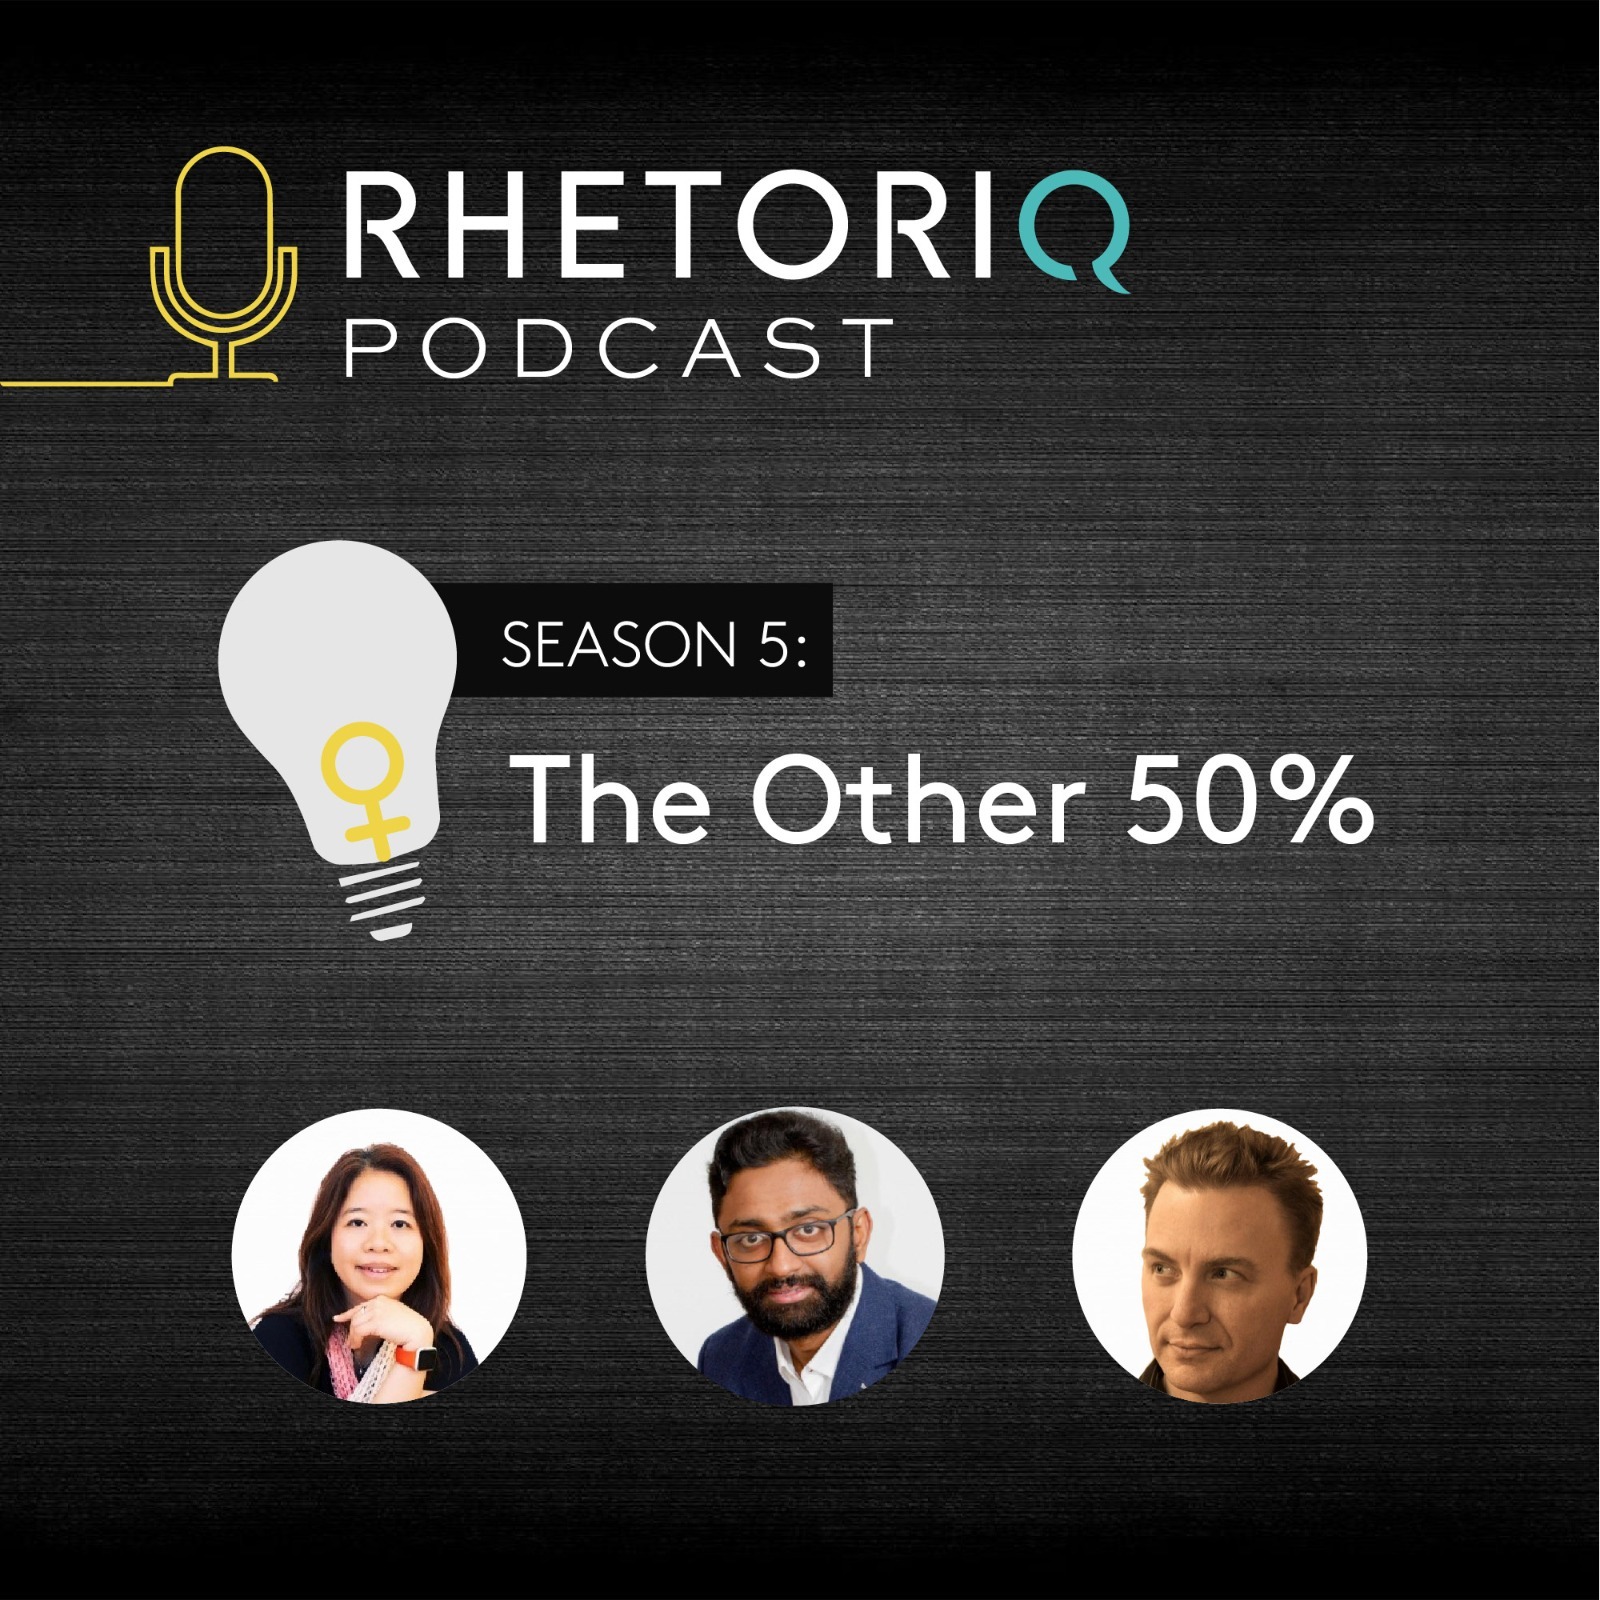 The Other 50: All roads must lead to Profitability